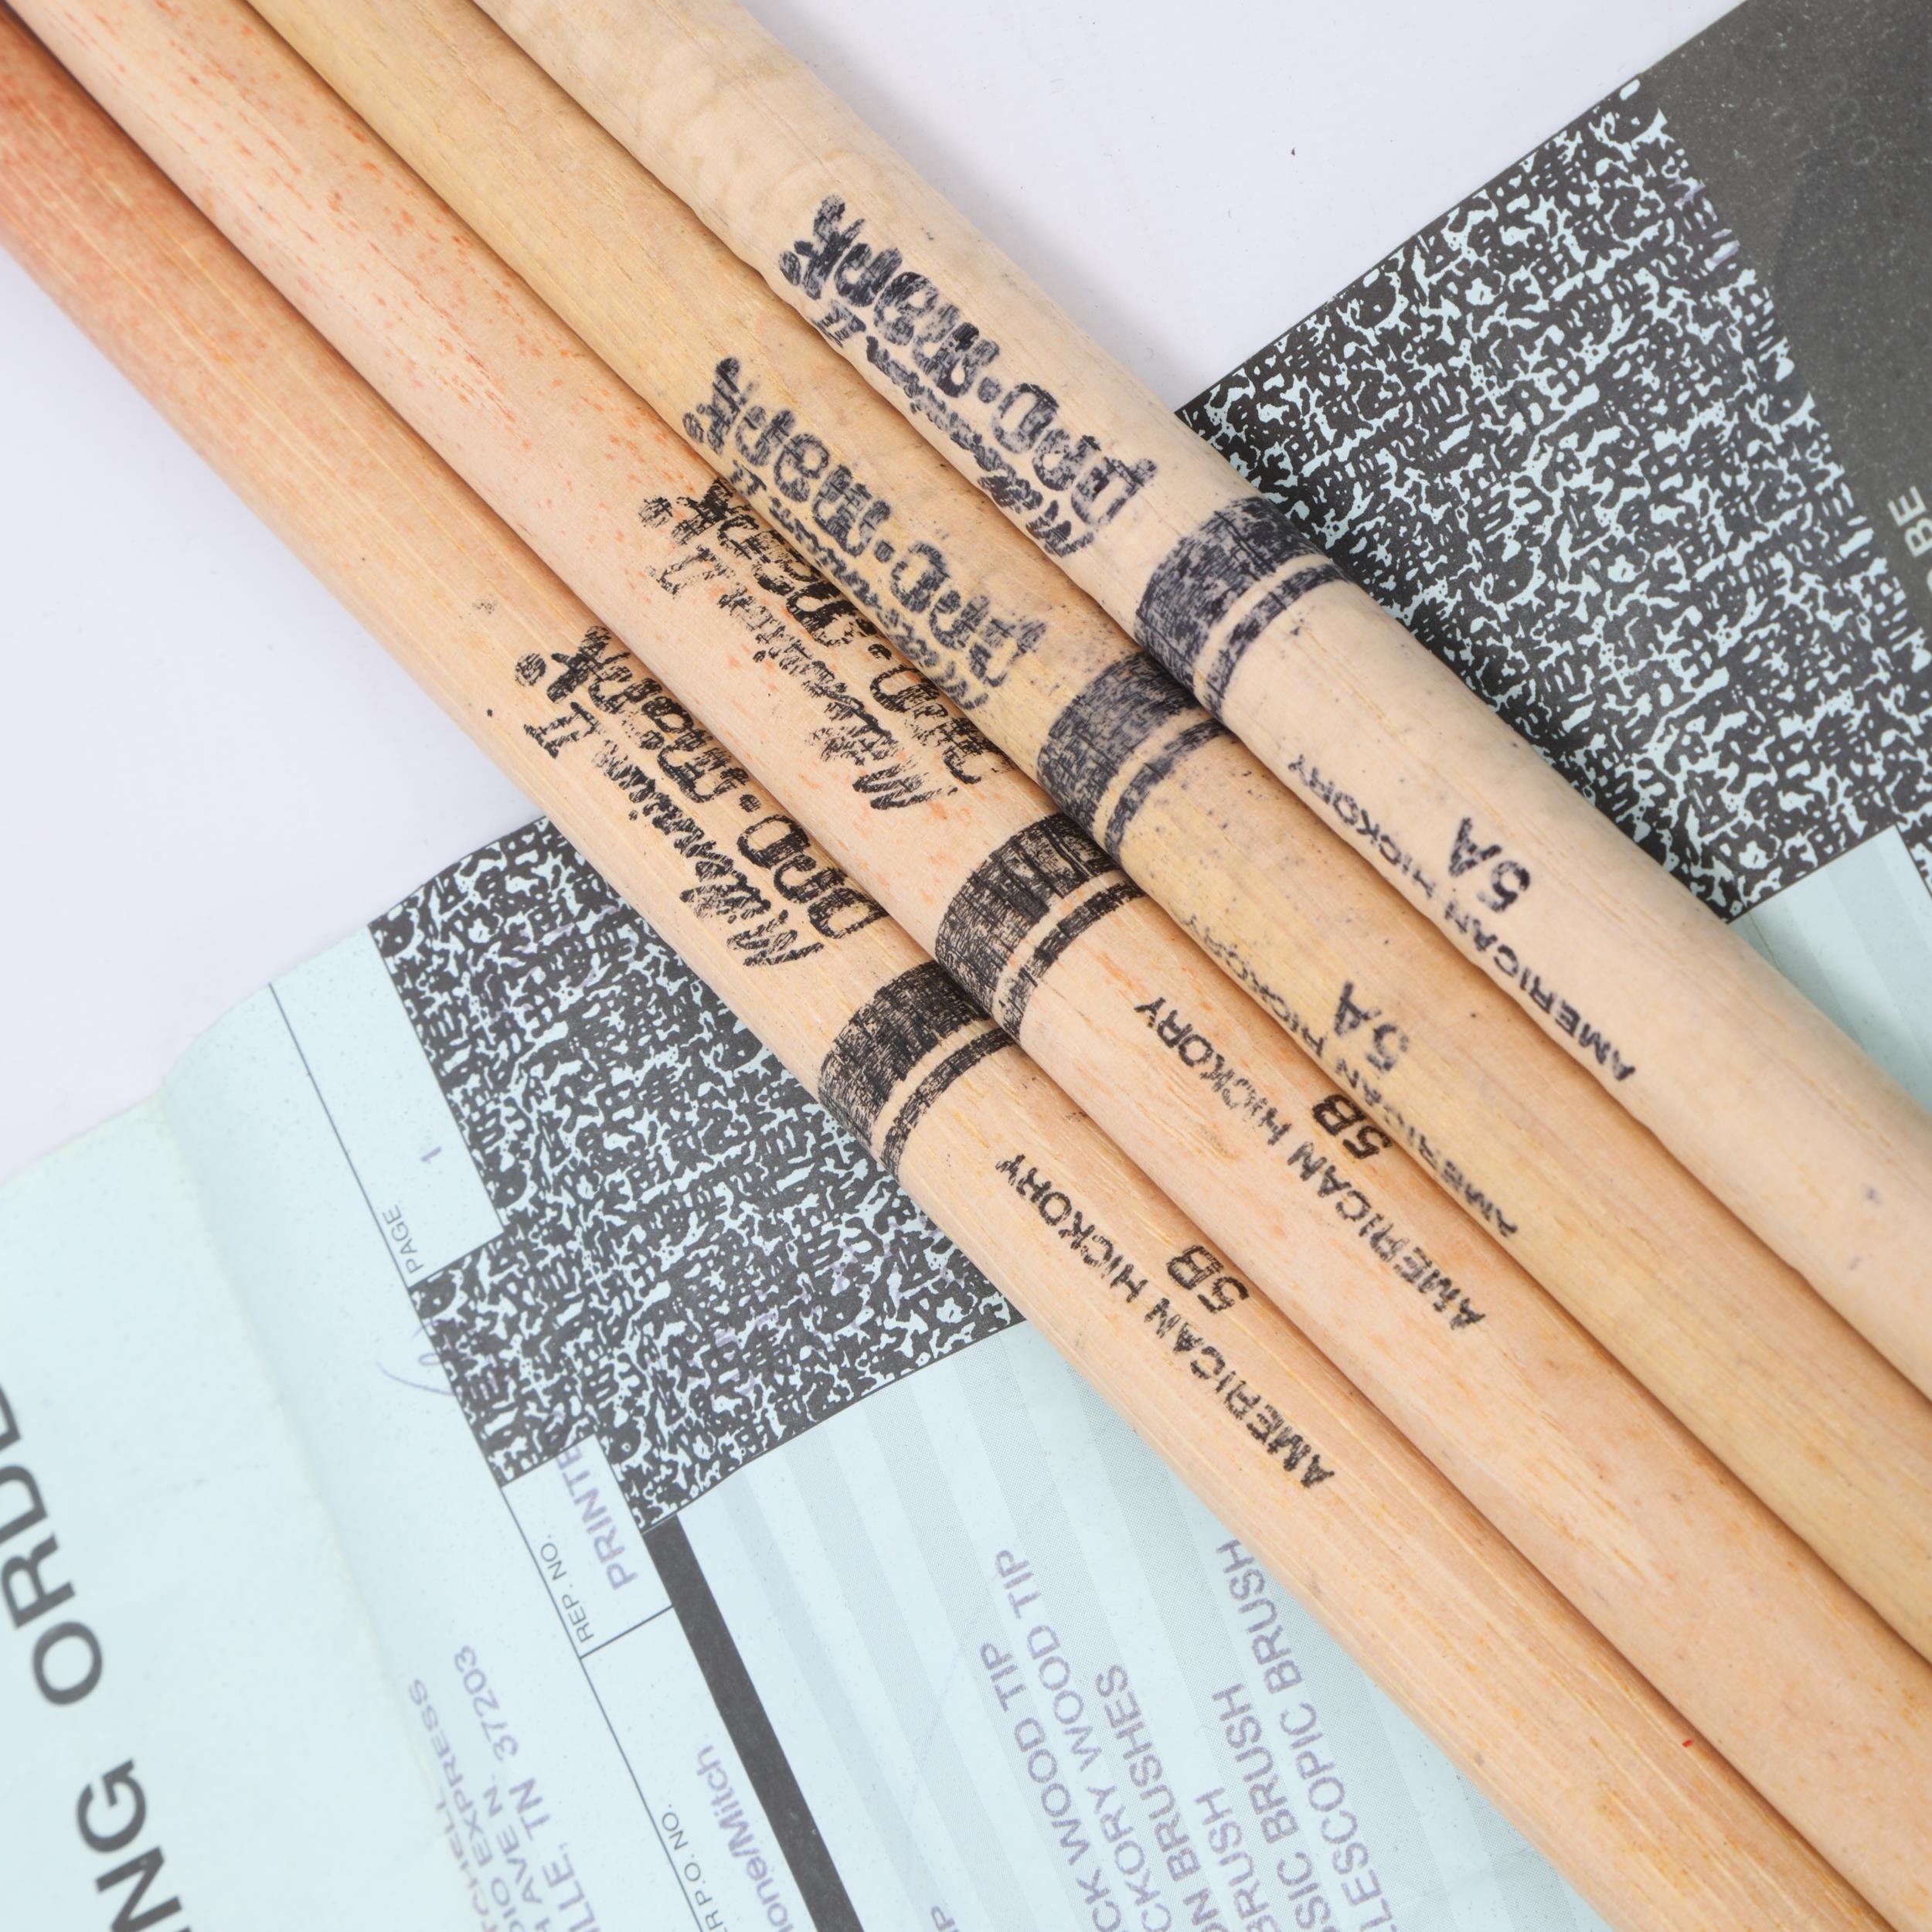 Four USED PROMARK Hickory DRUMSTICKS belonging to MITCH MITCHELL - with original Promark invoice - Image 3 of 3